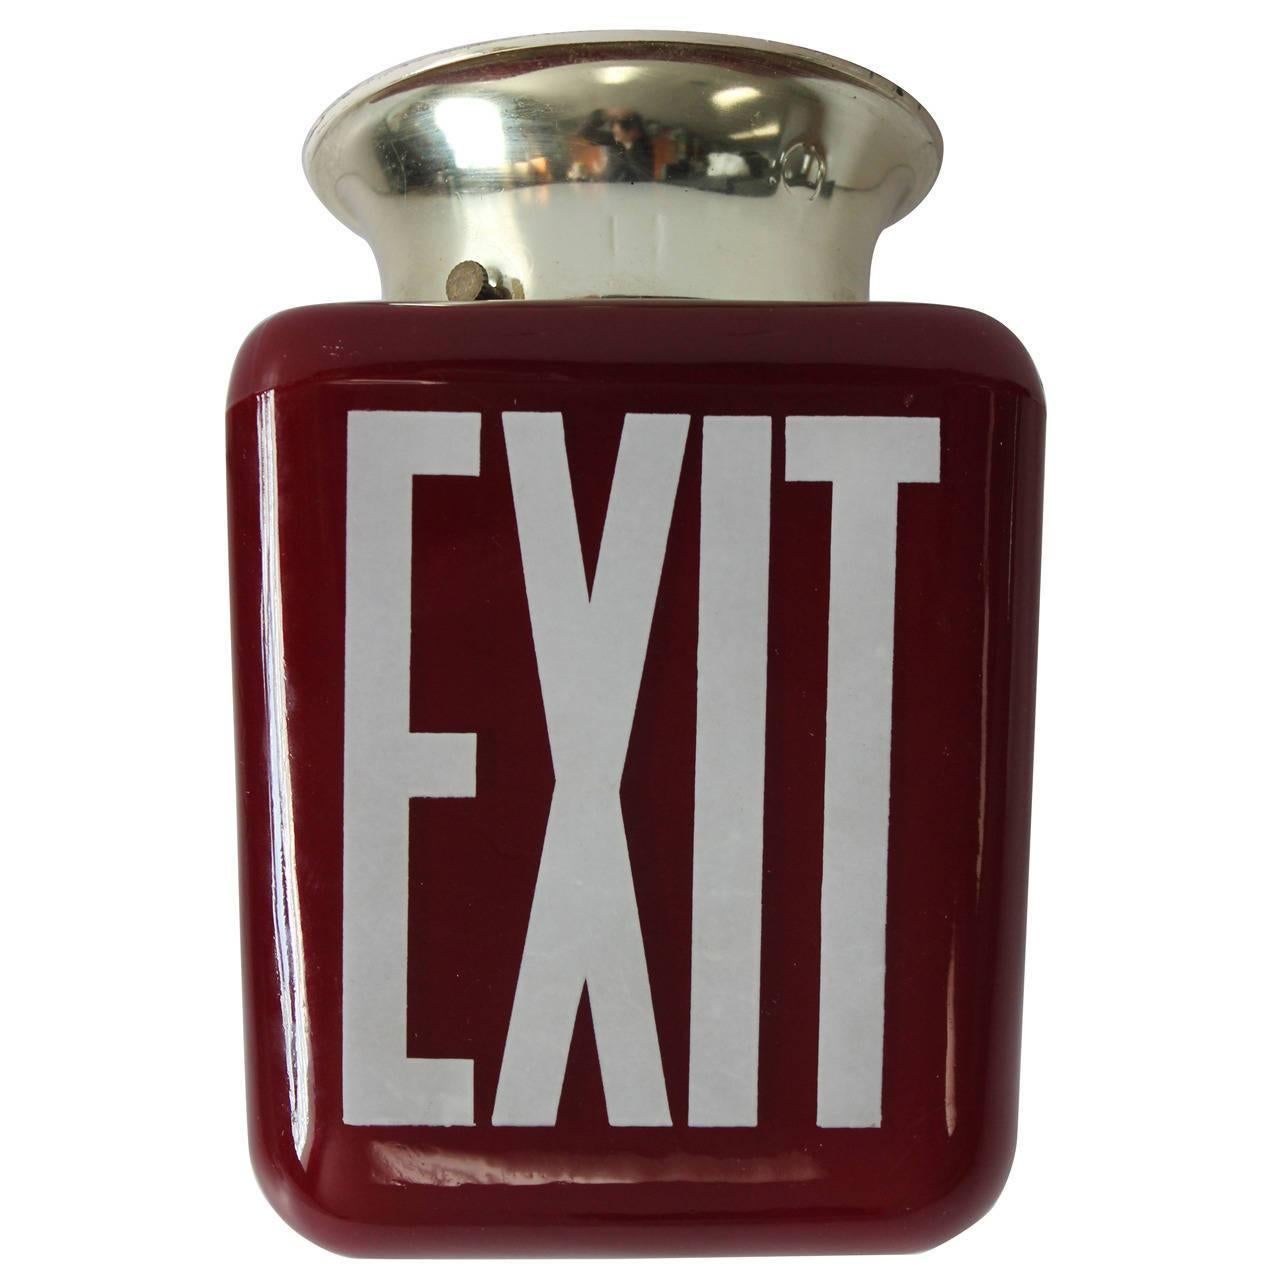 1930s American Double-Sided Ruby Red Exit Light. We have four lights available.